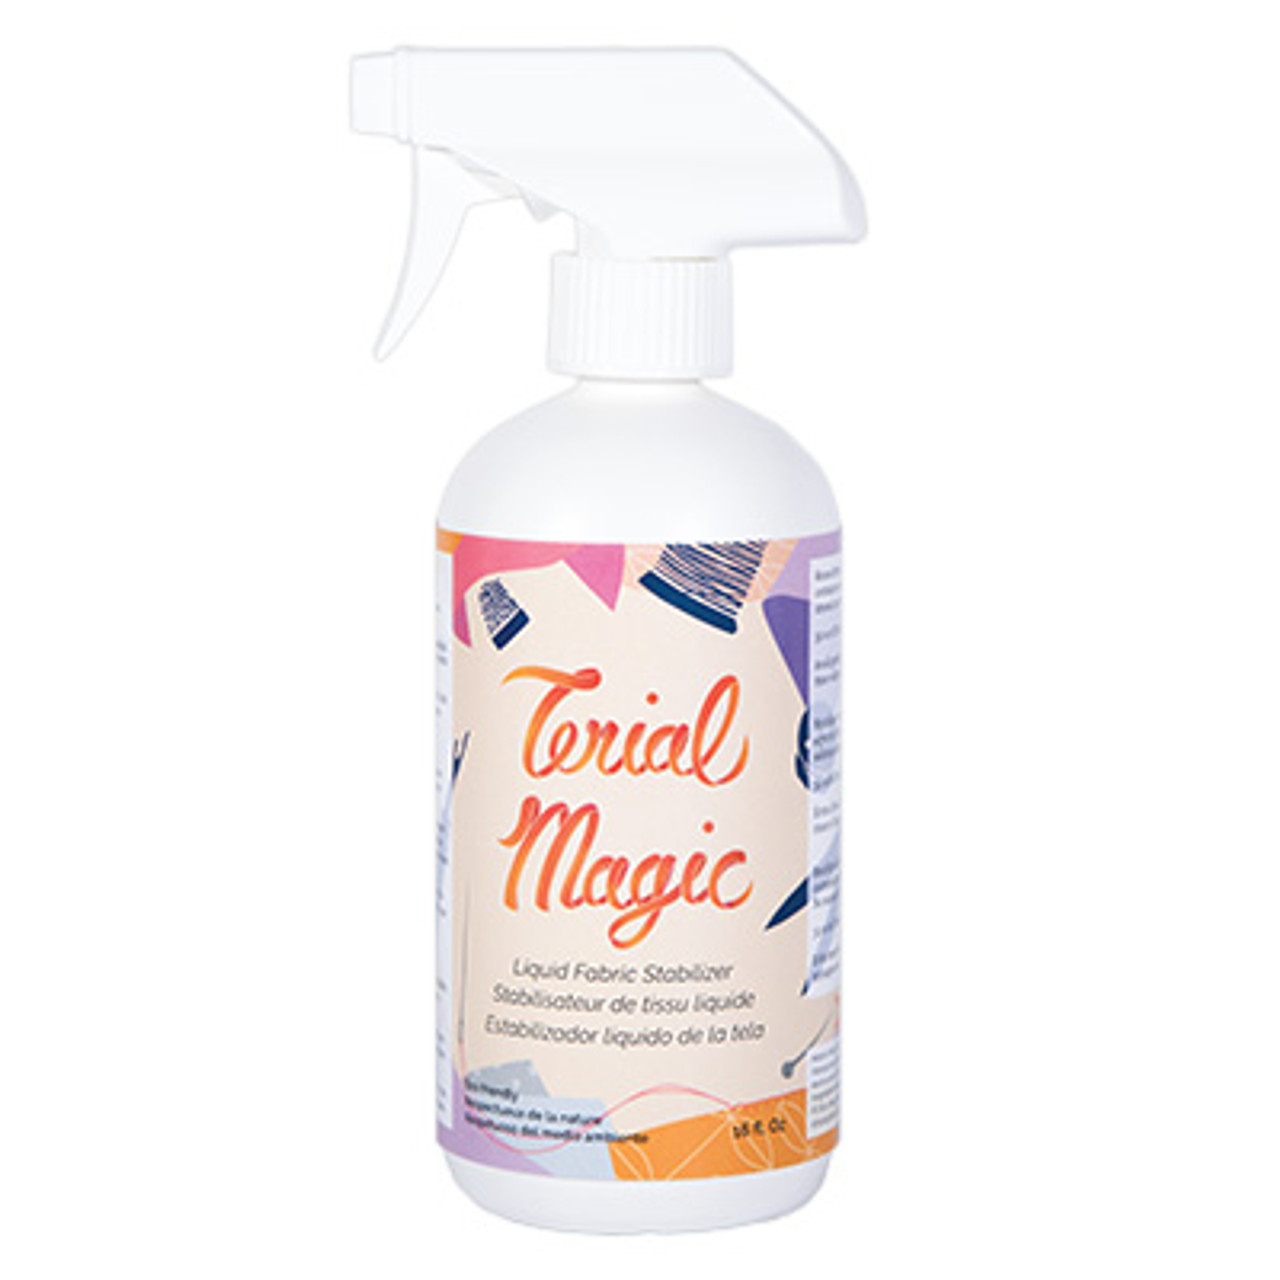 Terial Magic 16 oz - The Sewing Collection